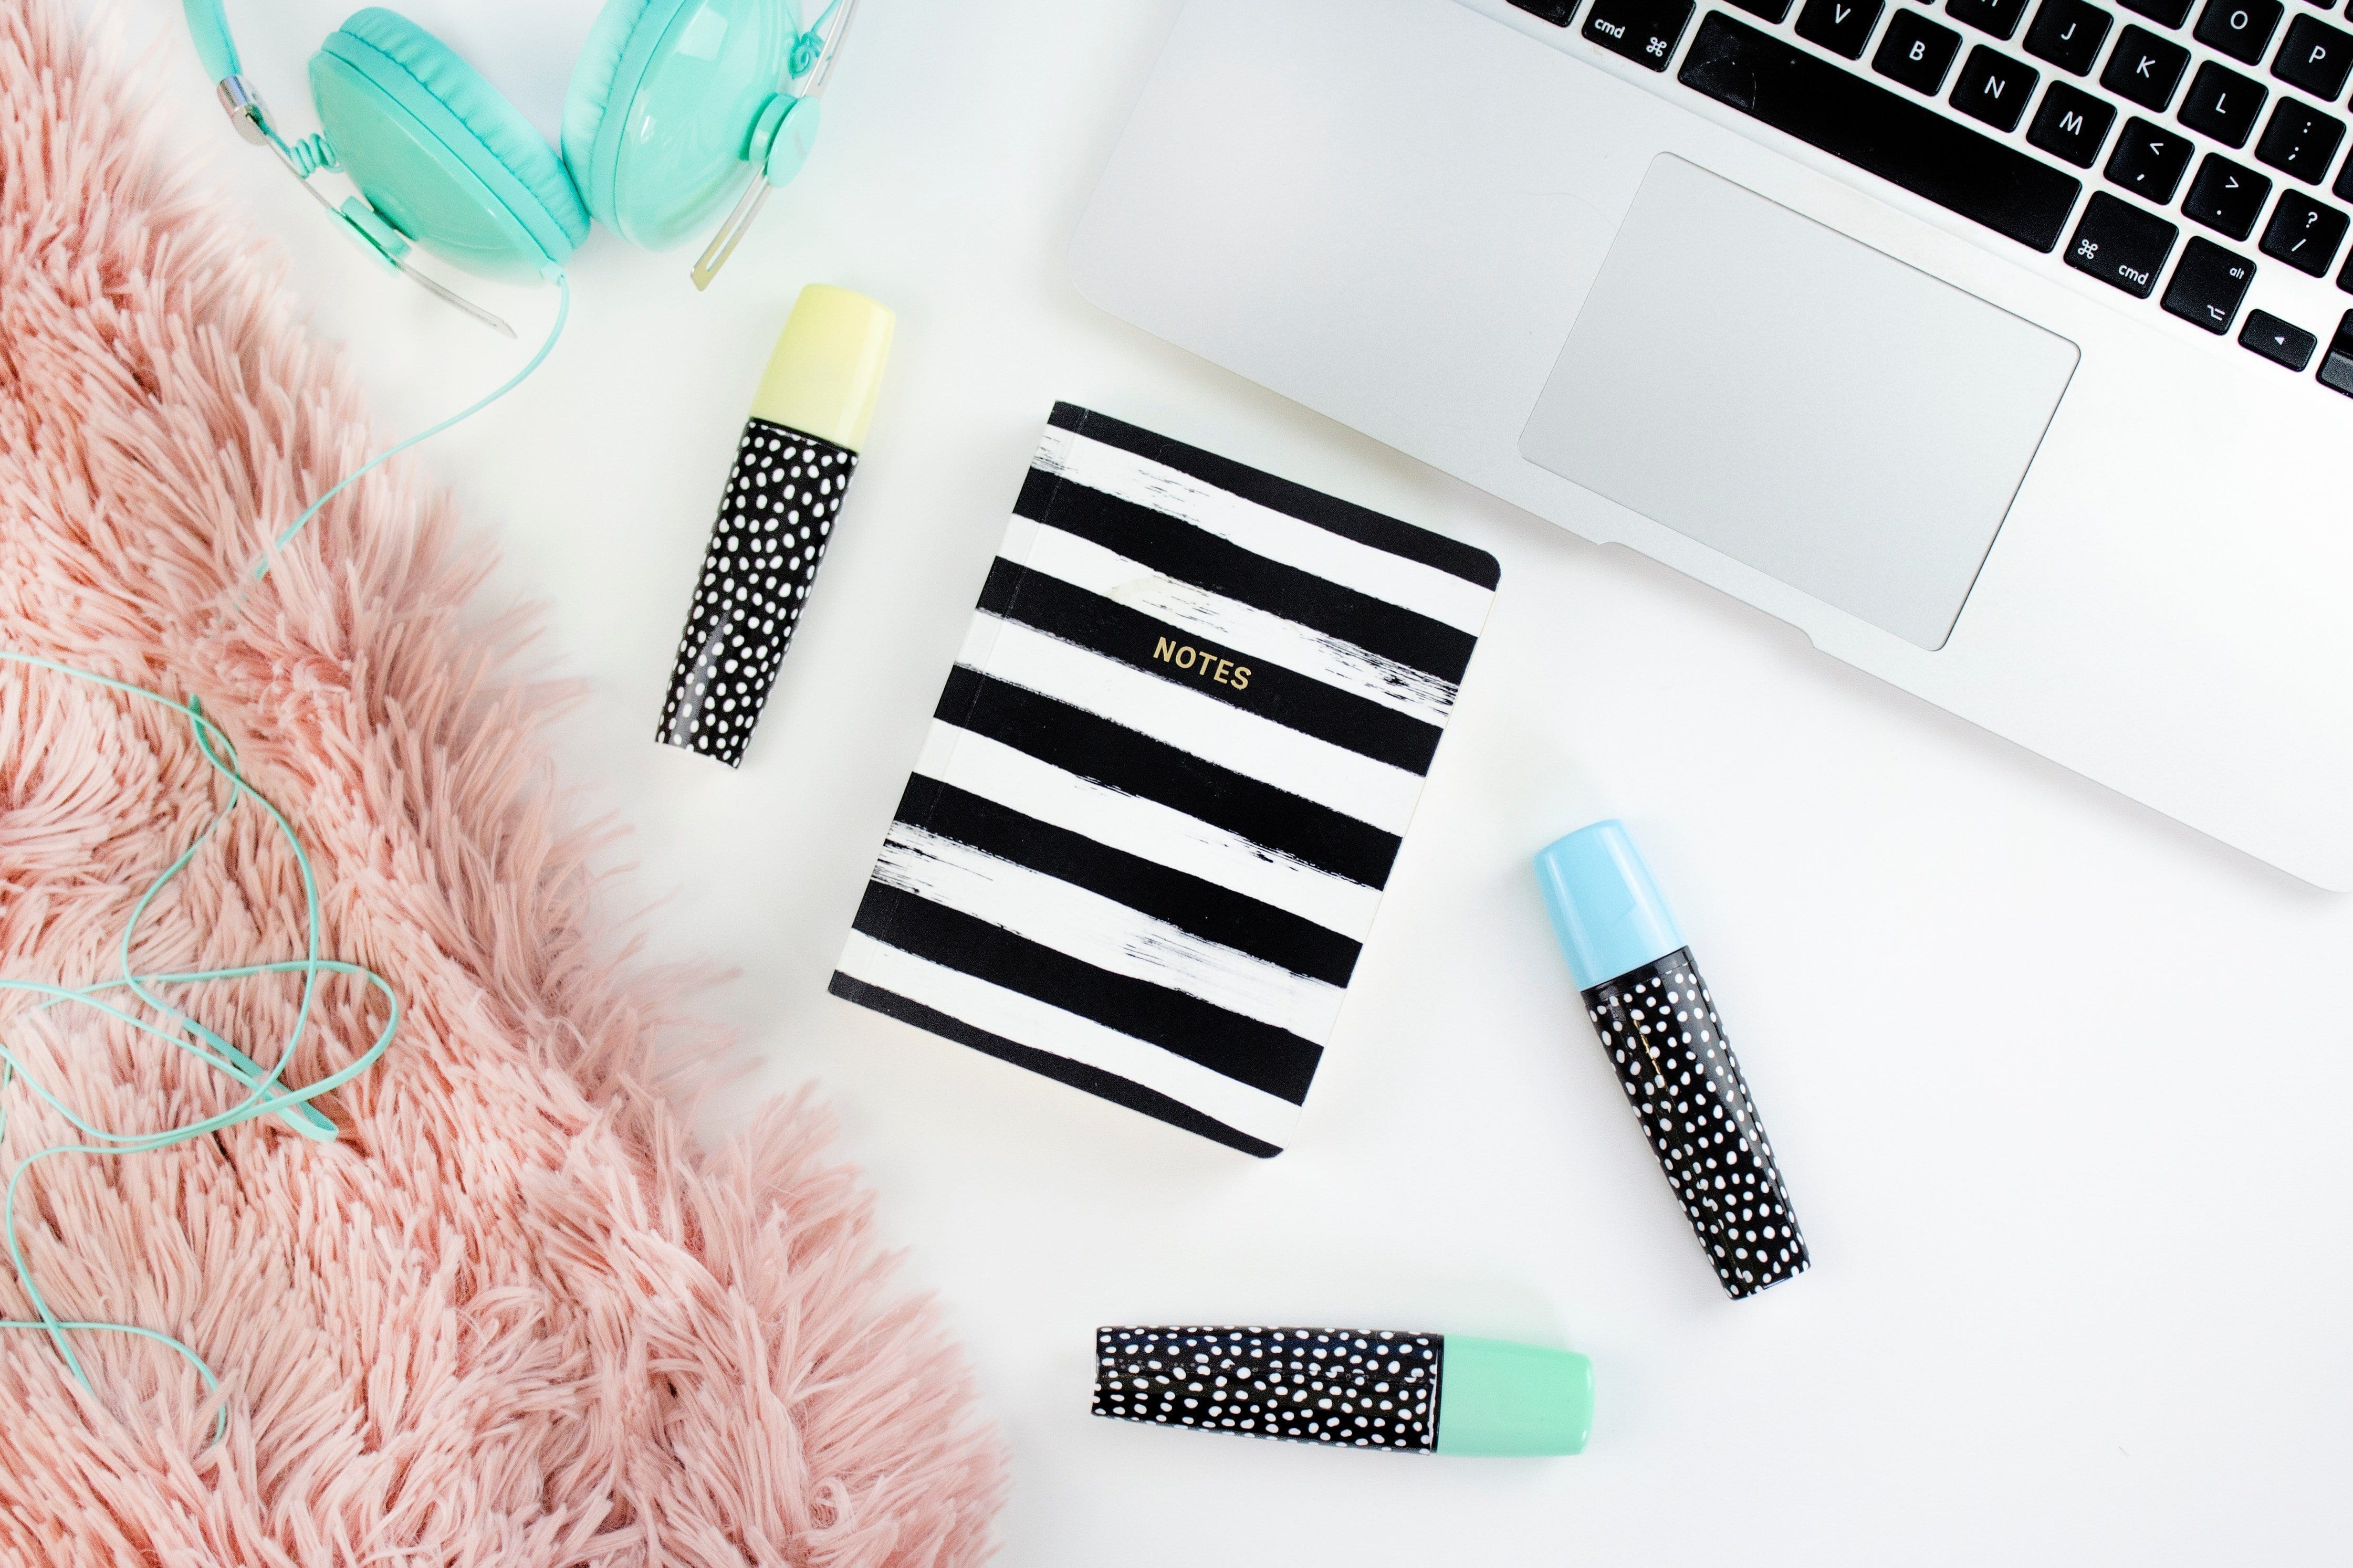 Blogging Tools And Resources For Every Amazing Lifestyle Blog